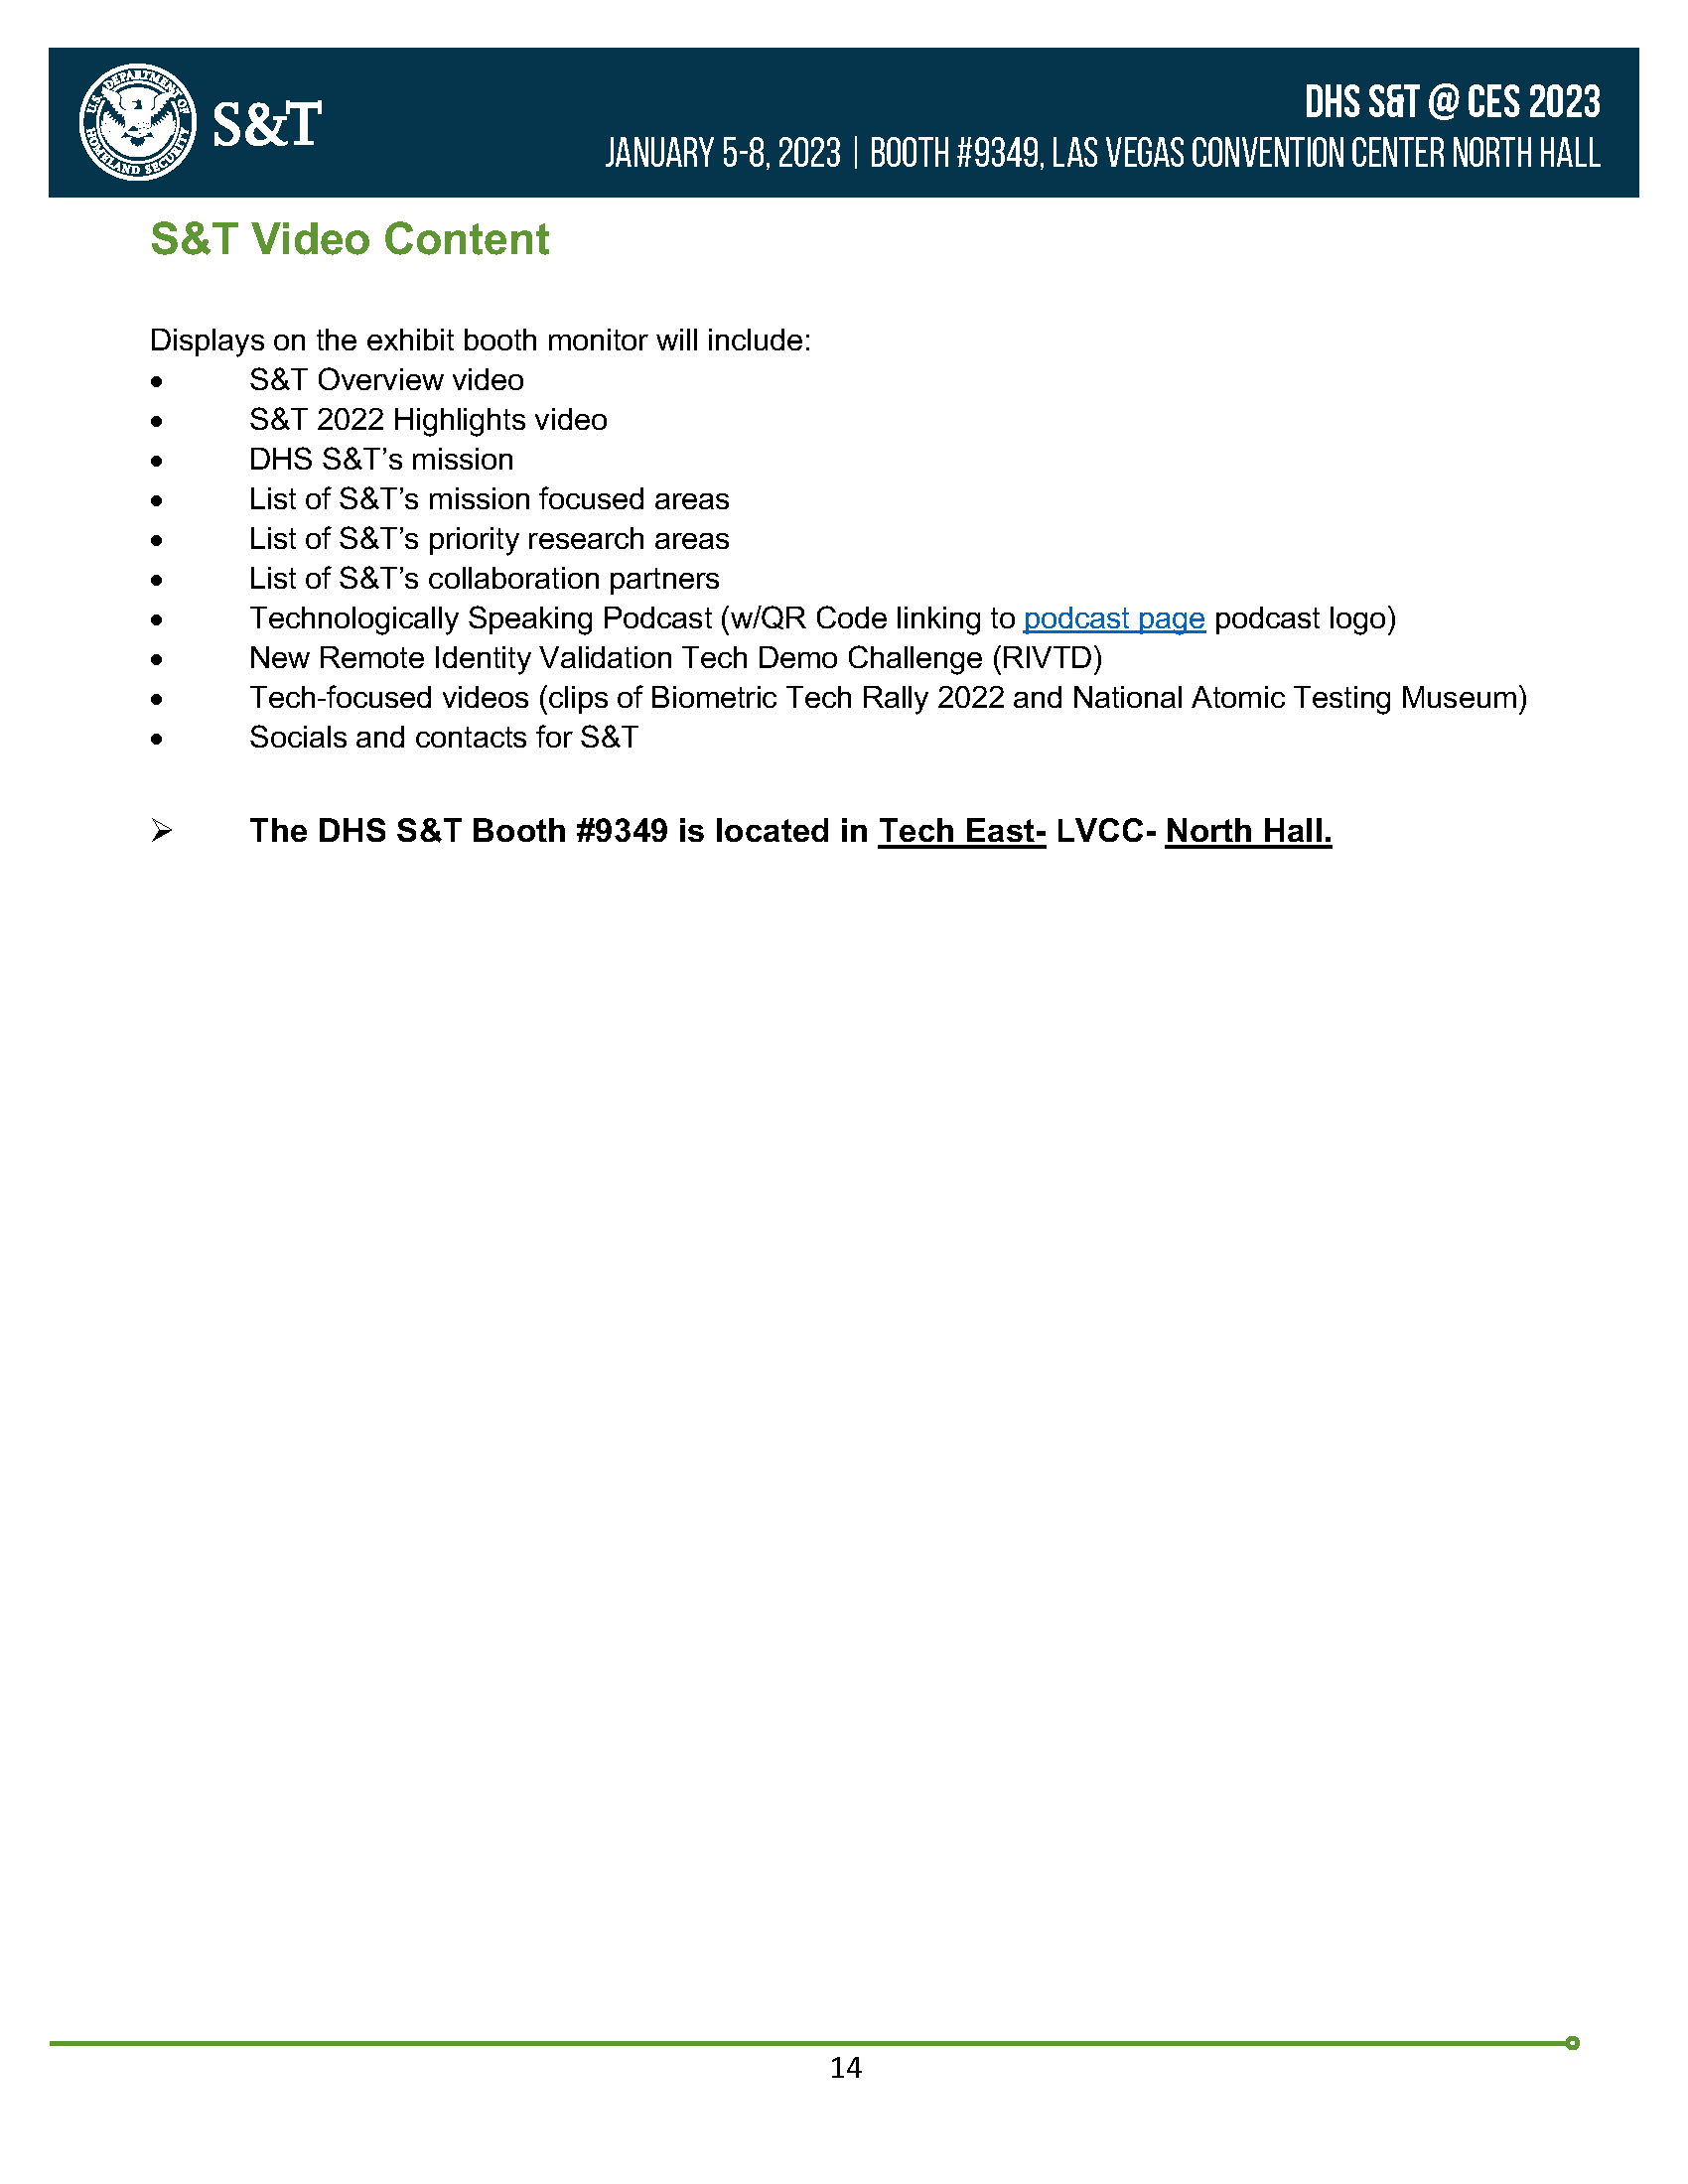 CES Readahead Document_Page_14.png